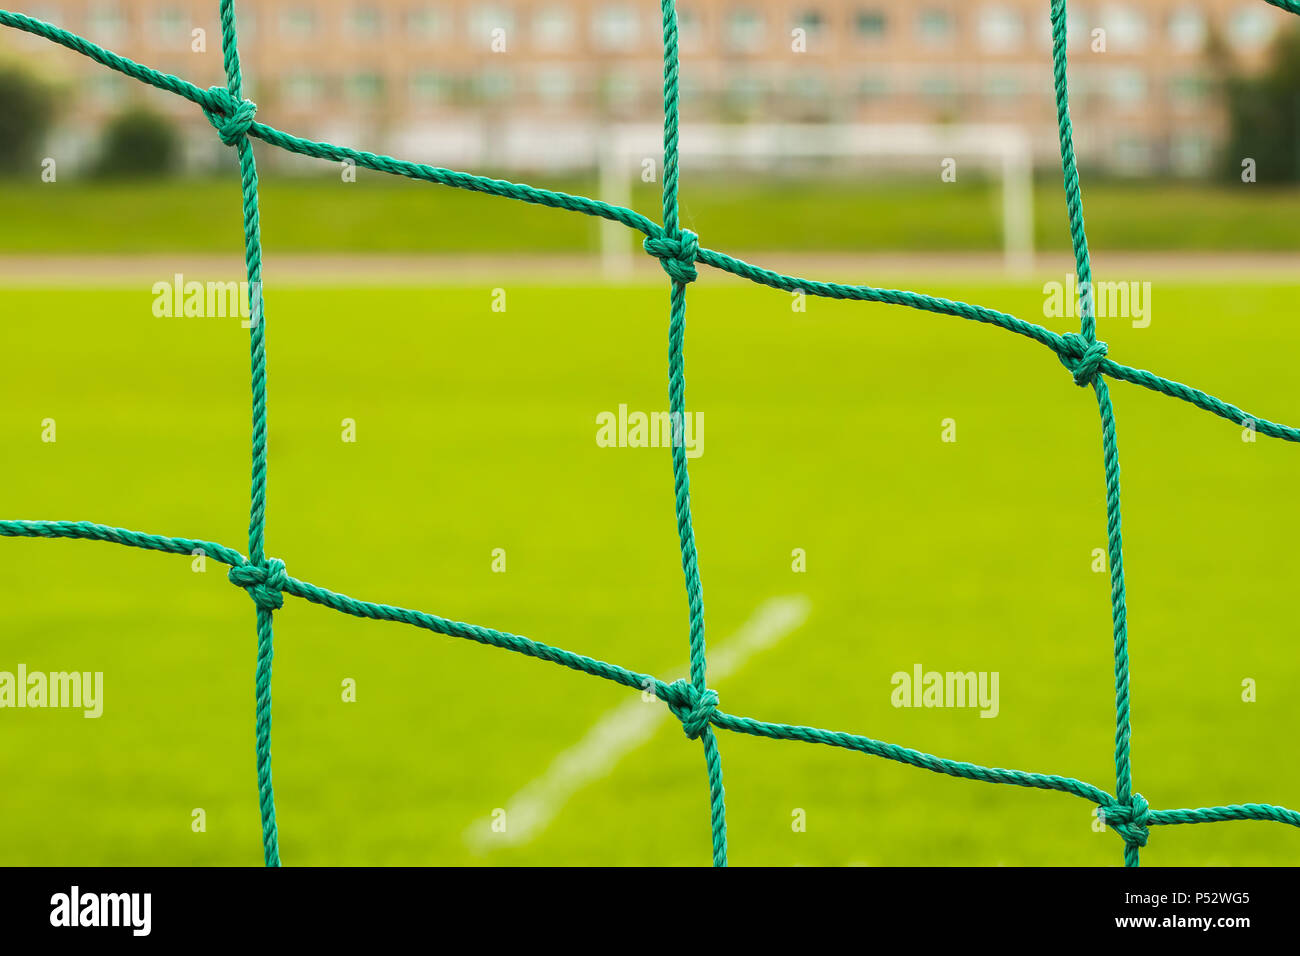 Abstract soccer goal net pattern Stock Photo